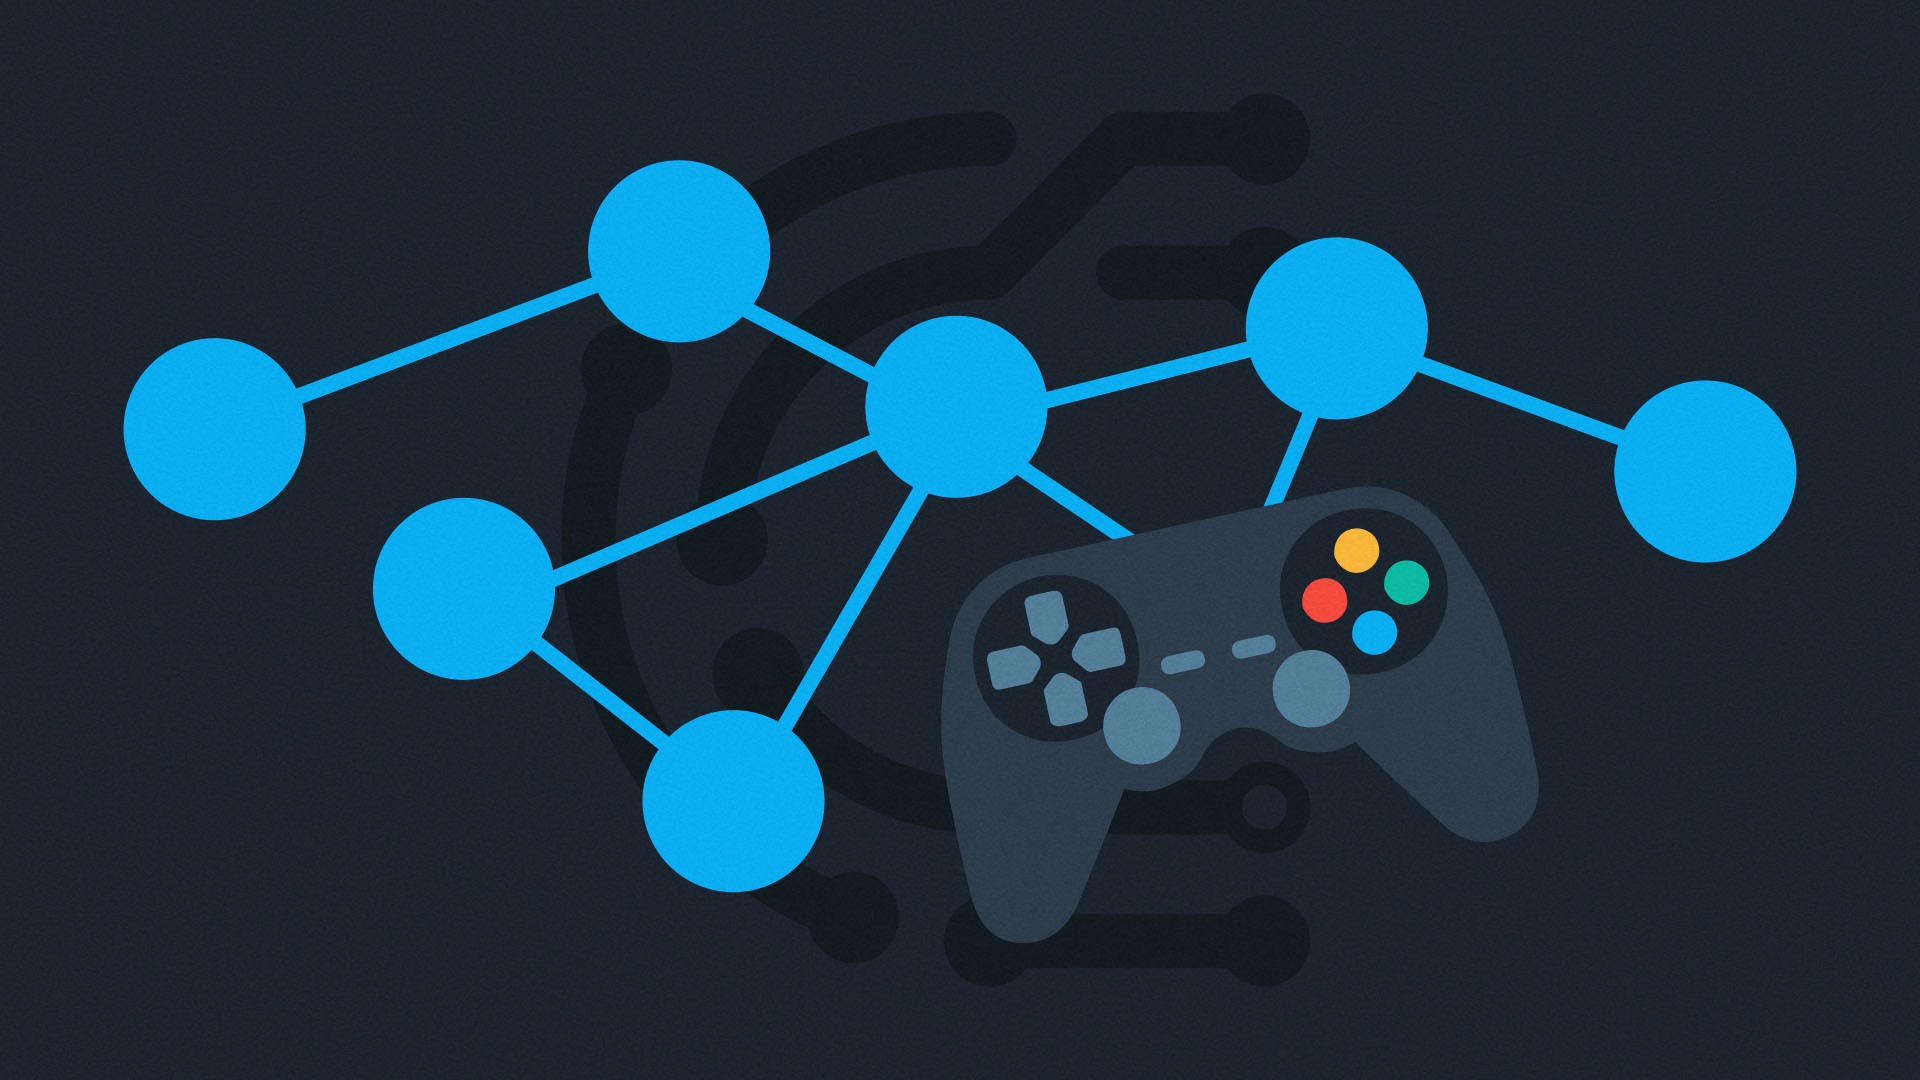 Why play-to-earn will redefine gaming?